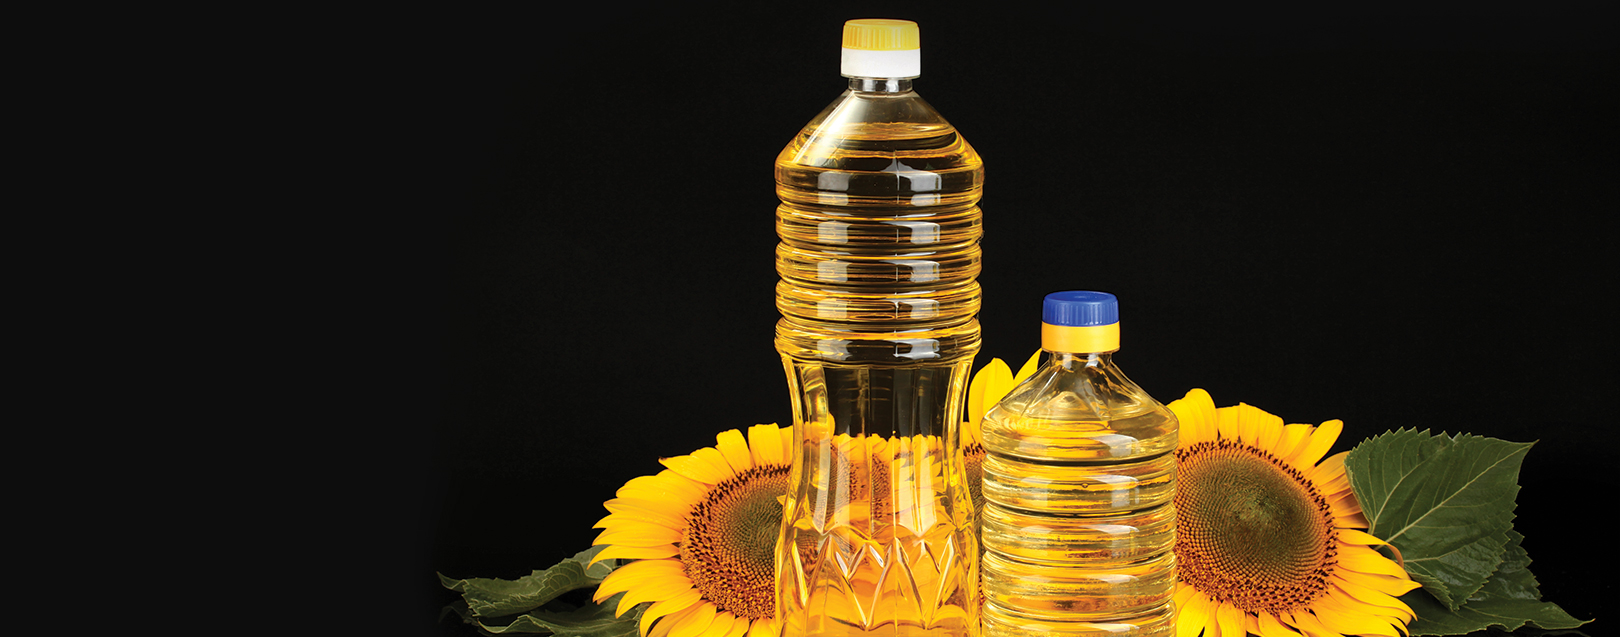 Crude sunflower Oil - Think Of The Second Word: Sunflower... March 2018 issue